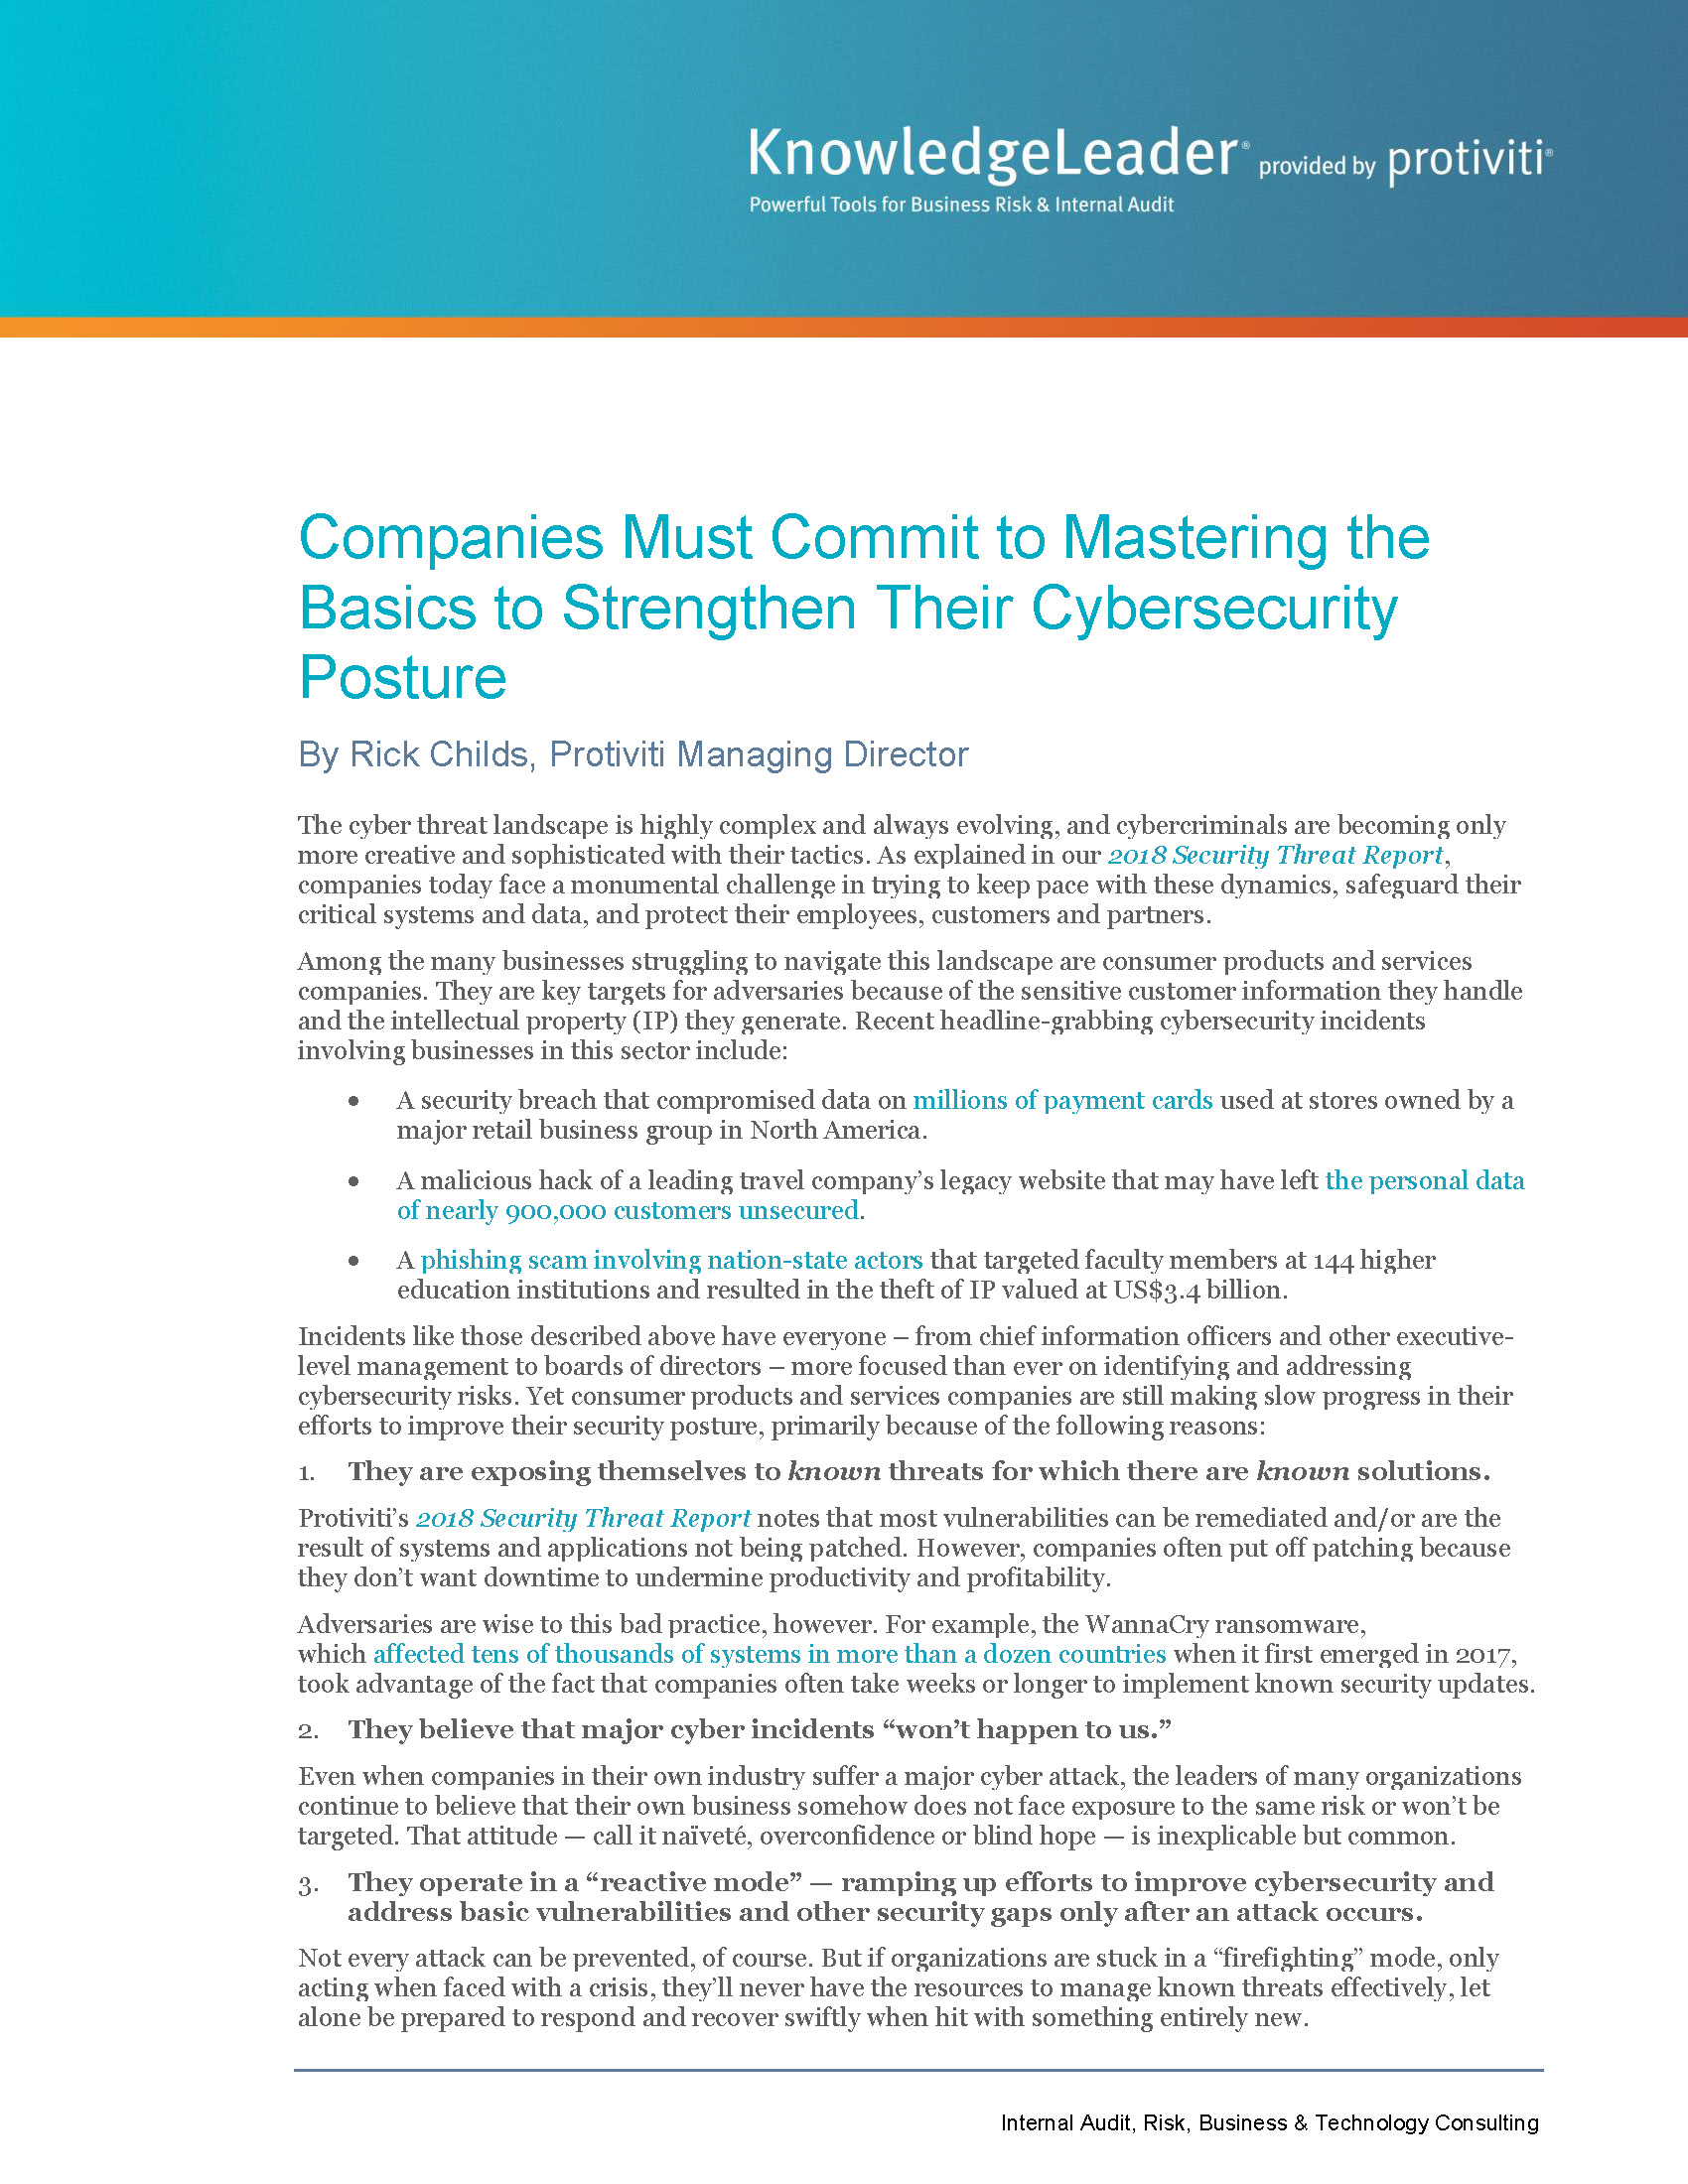 Screenshot of the first page of Companies Must Commit to Mastering the Basics to Strengthen Their Cybersecurity Posture